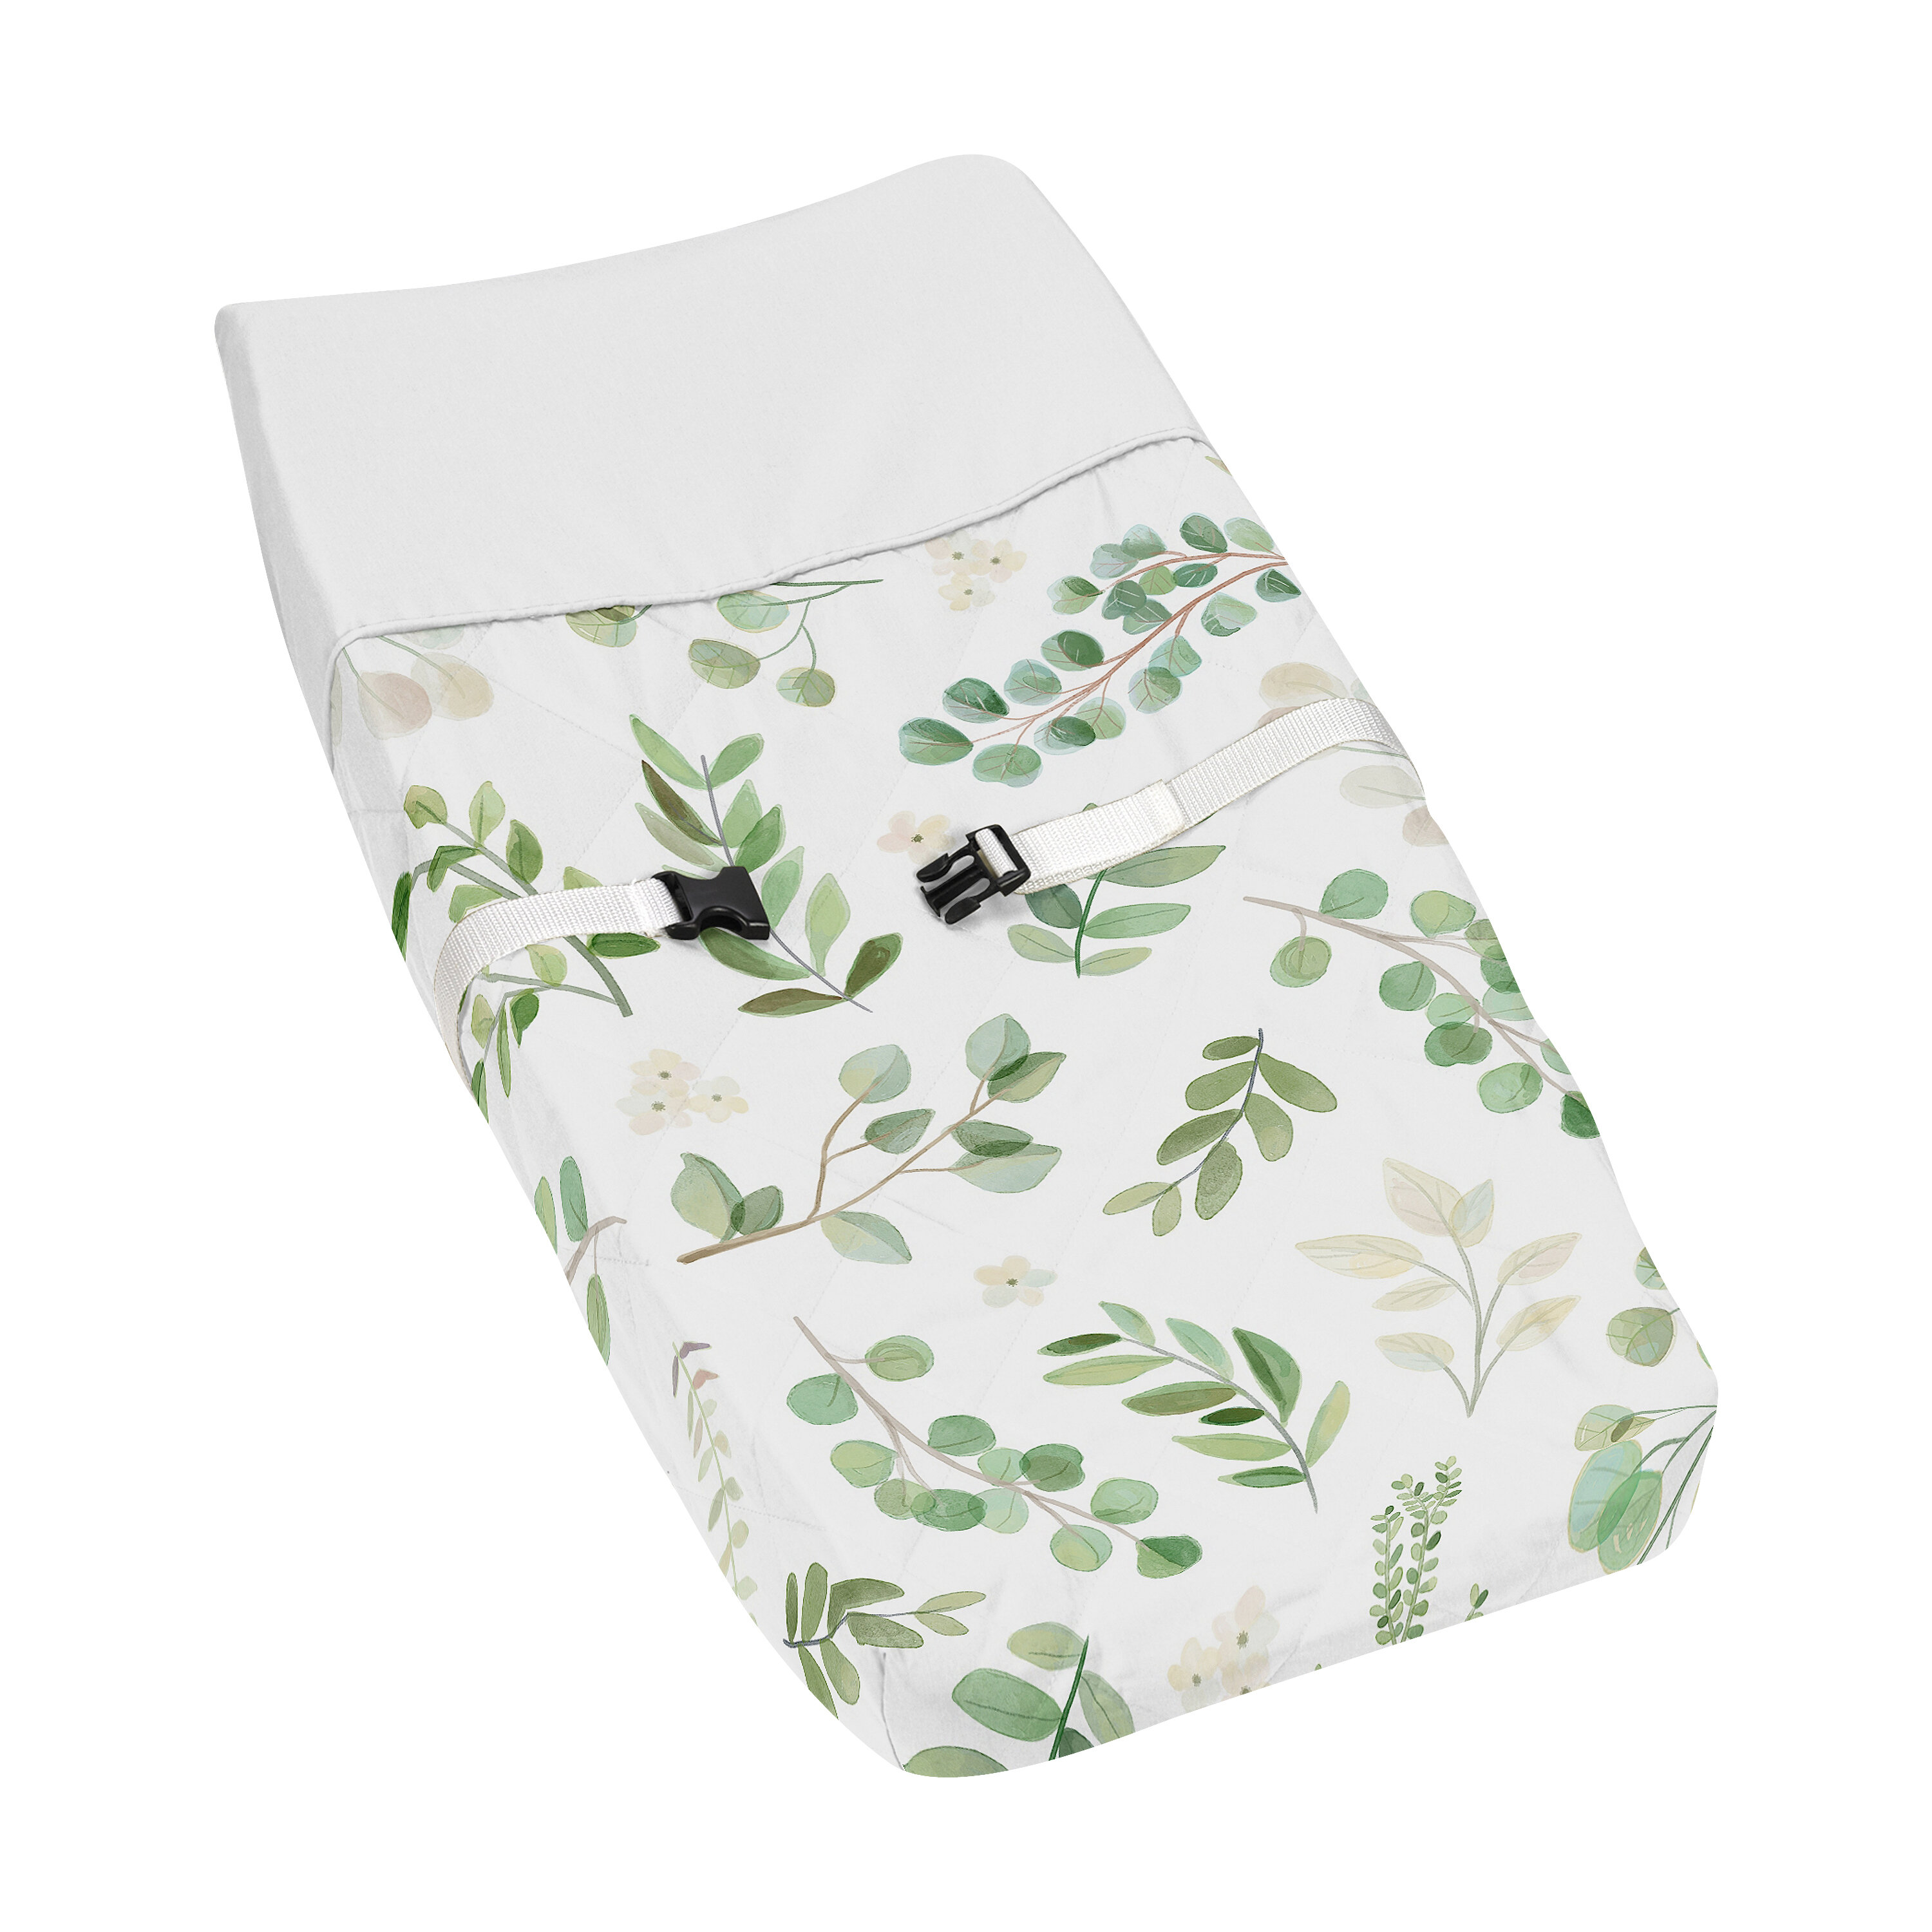 Soft Cover for Diaper Changing Pad with Safety Buckle Holes Olive Branches with Leaves Classic Simplistic Soft Spring Time Theme Ambesonne Garden Changing Pad Cover Almond 